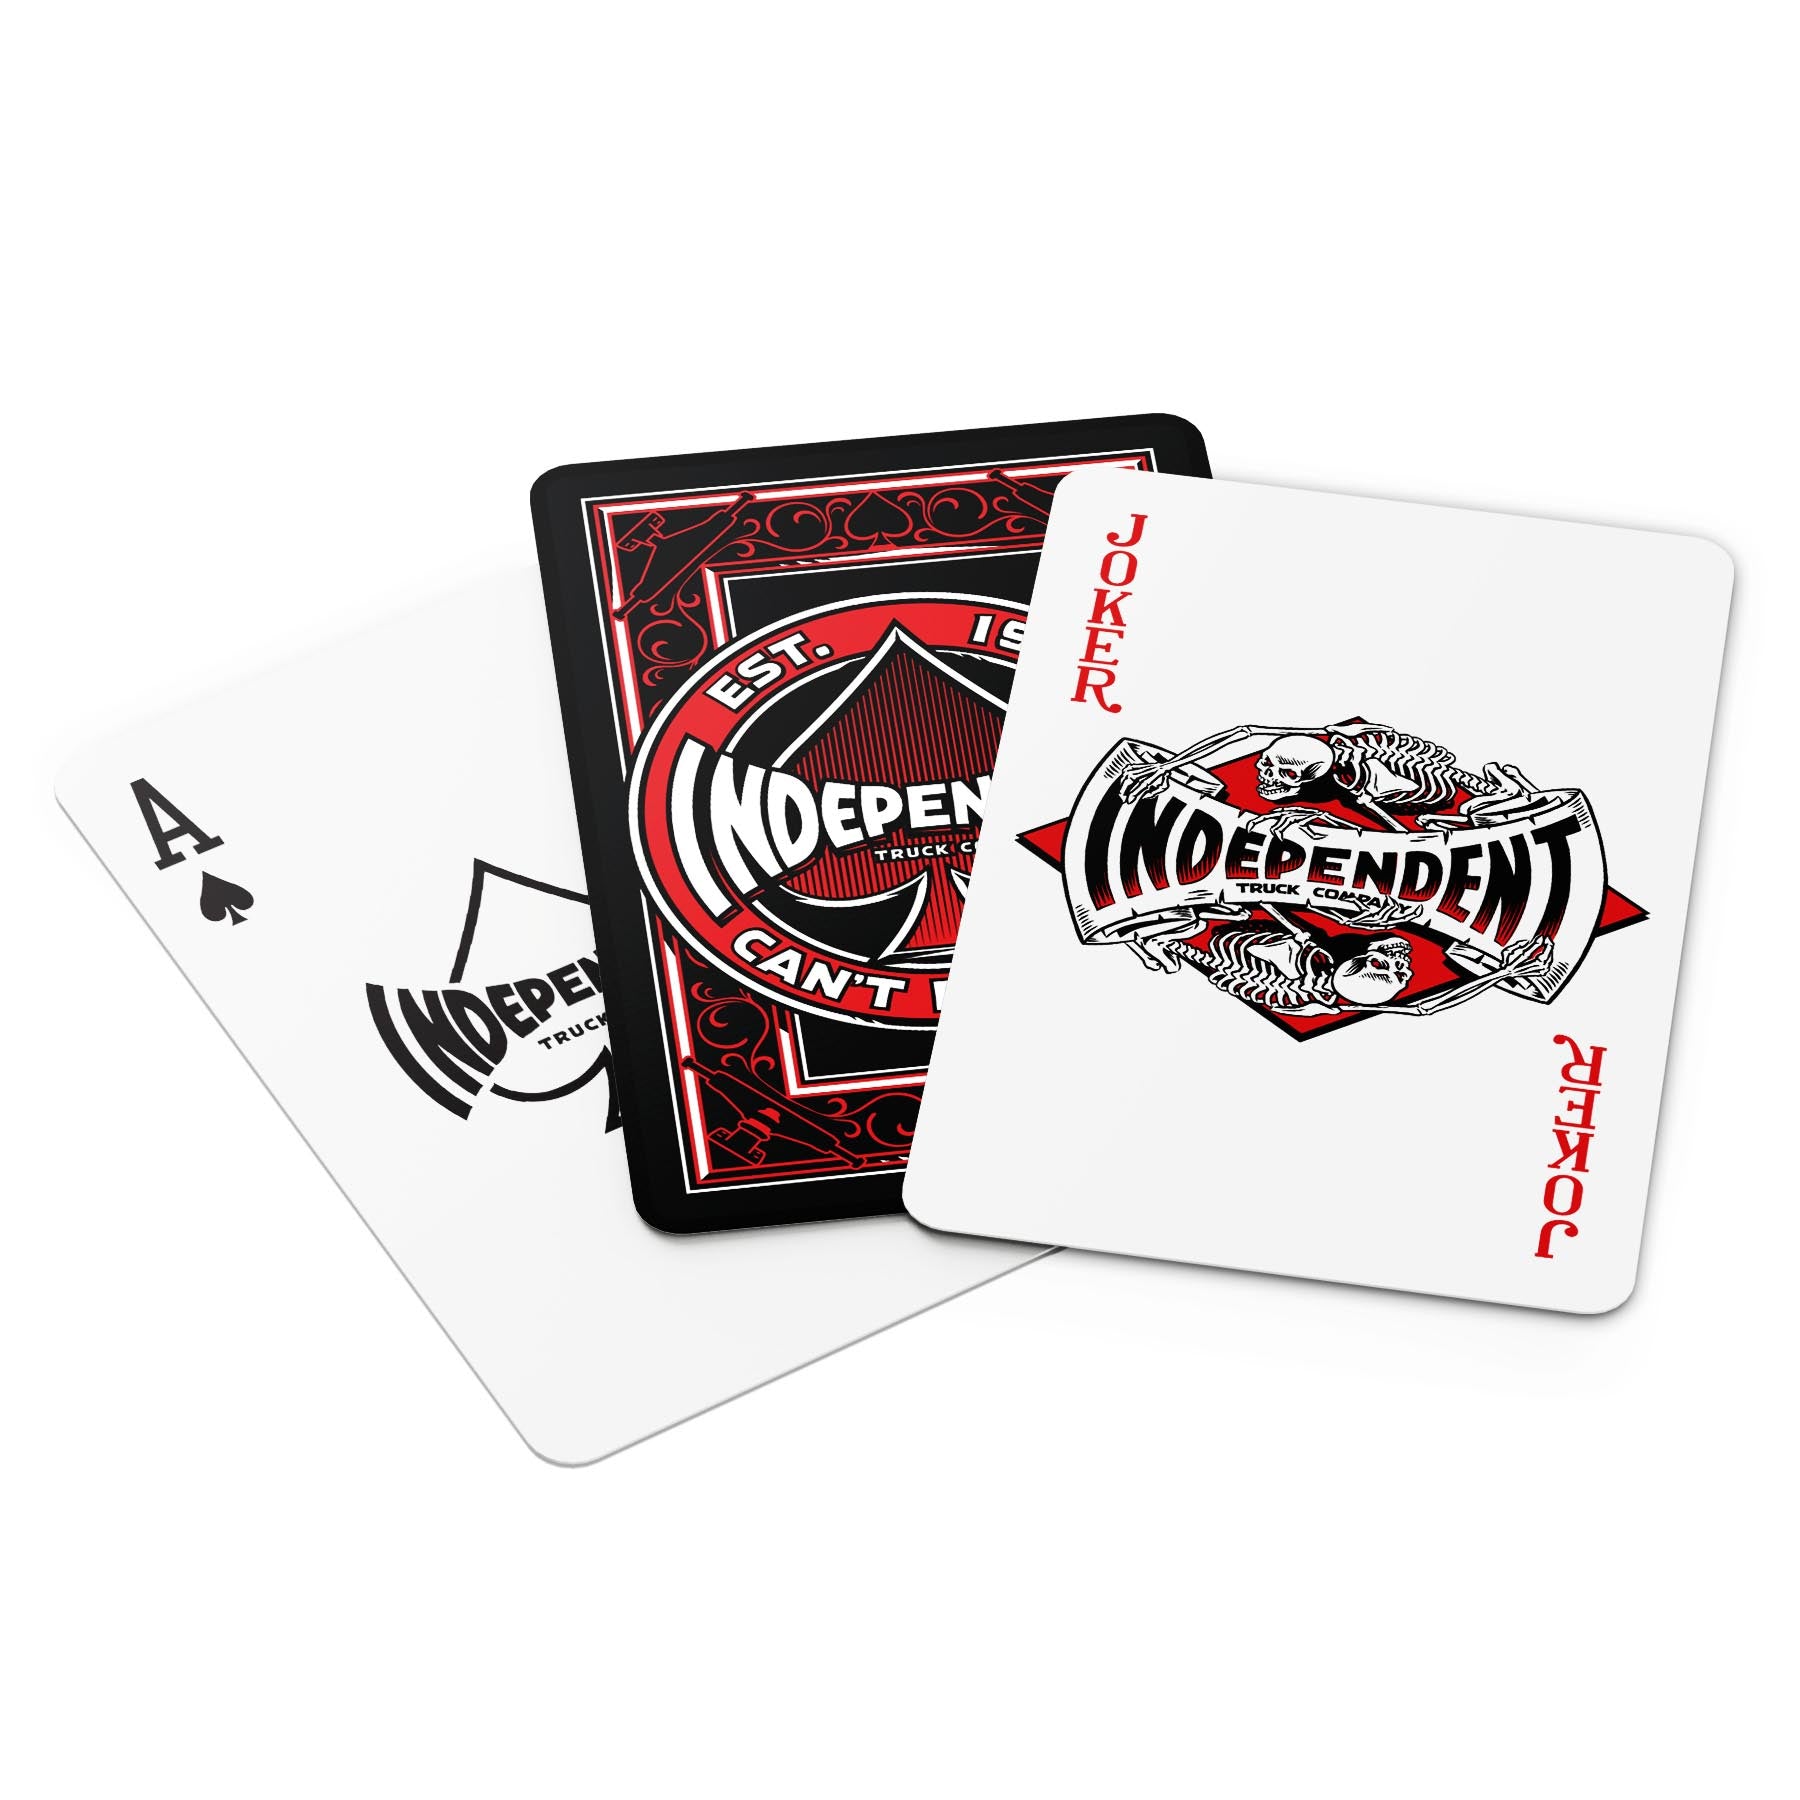 Independent Can't Be Beat Playing Cards Black/Red